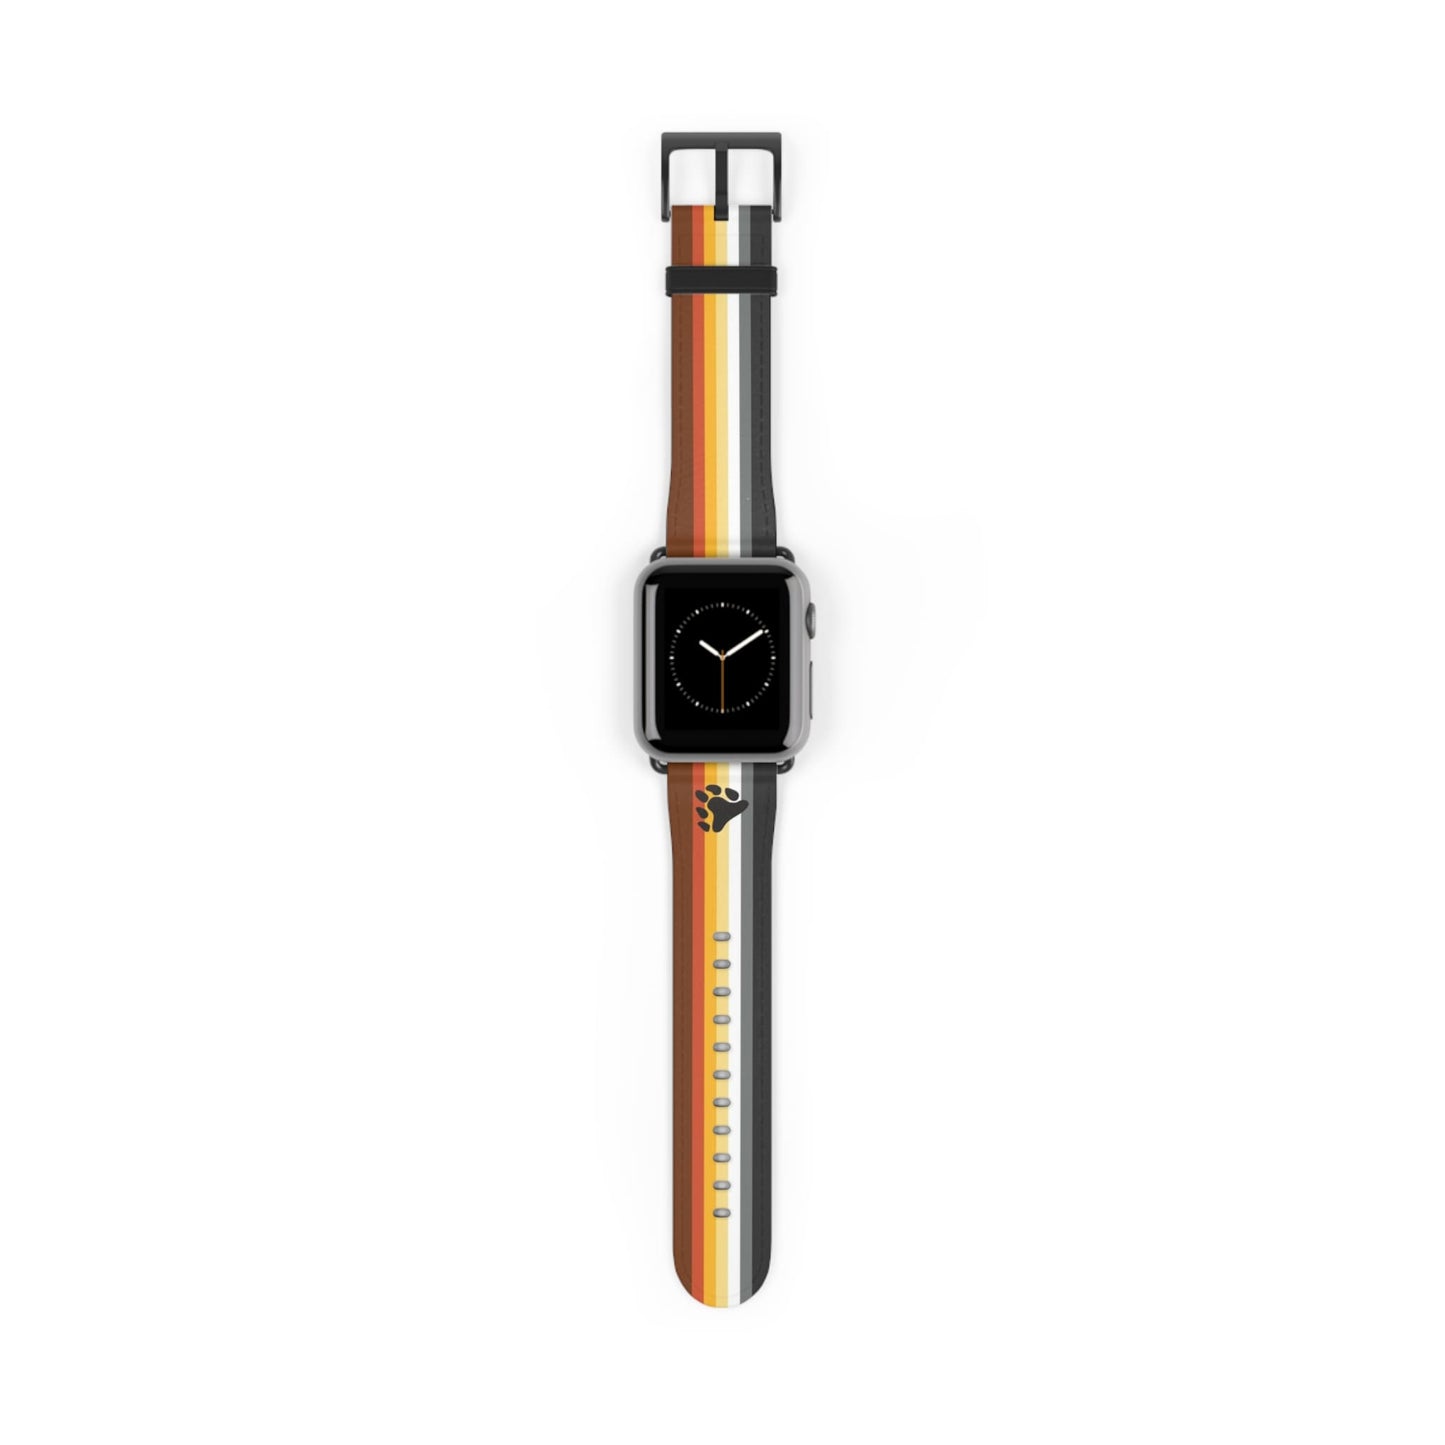 bear pride watch band for Apple iwatch, black